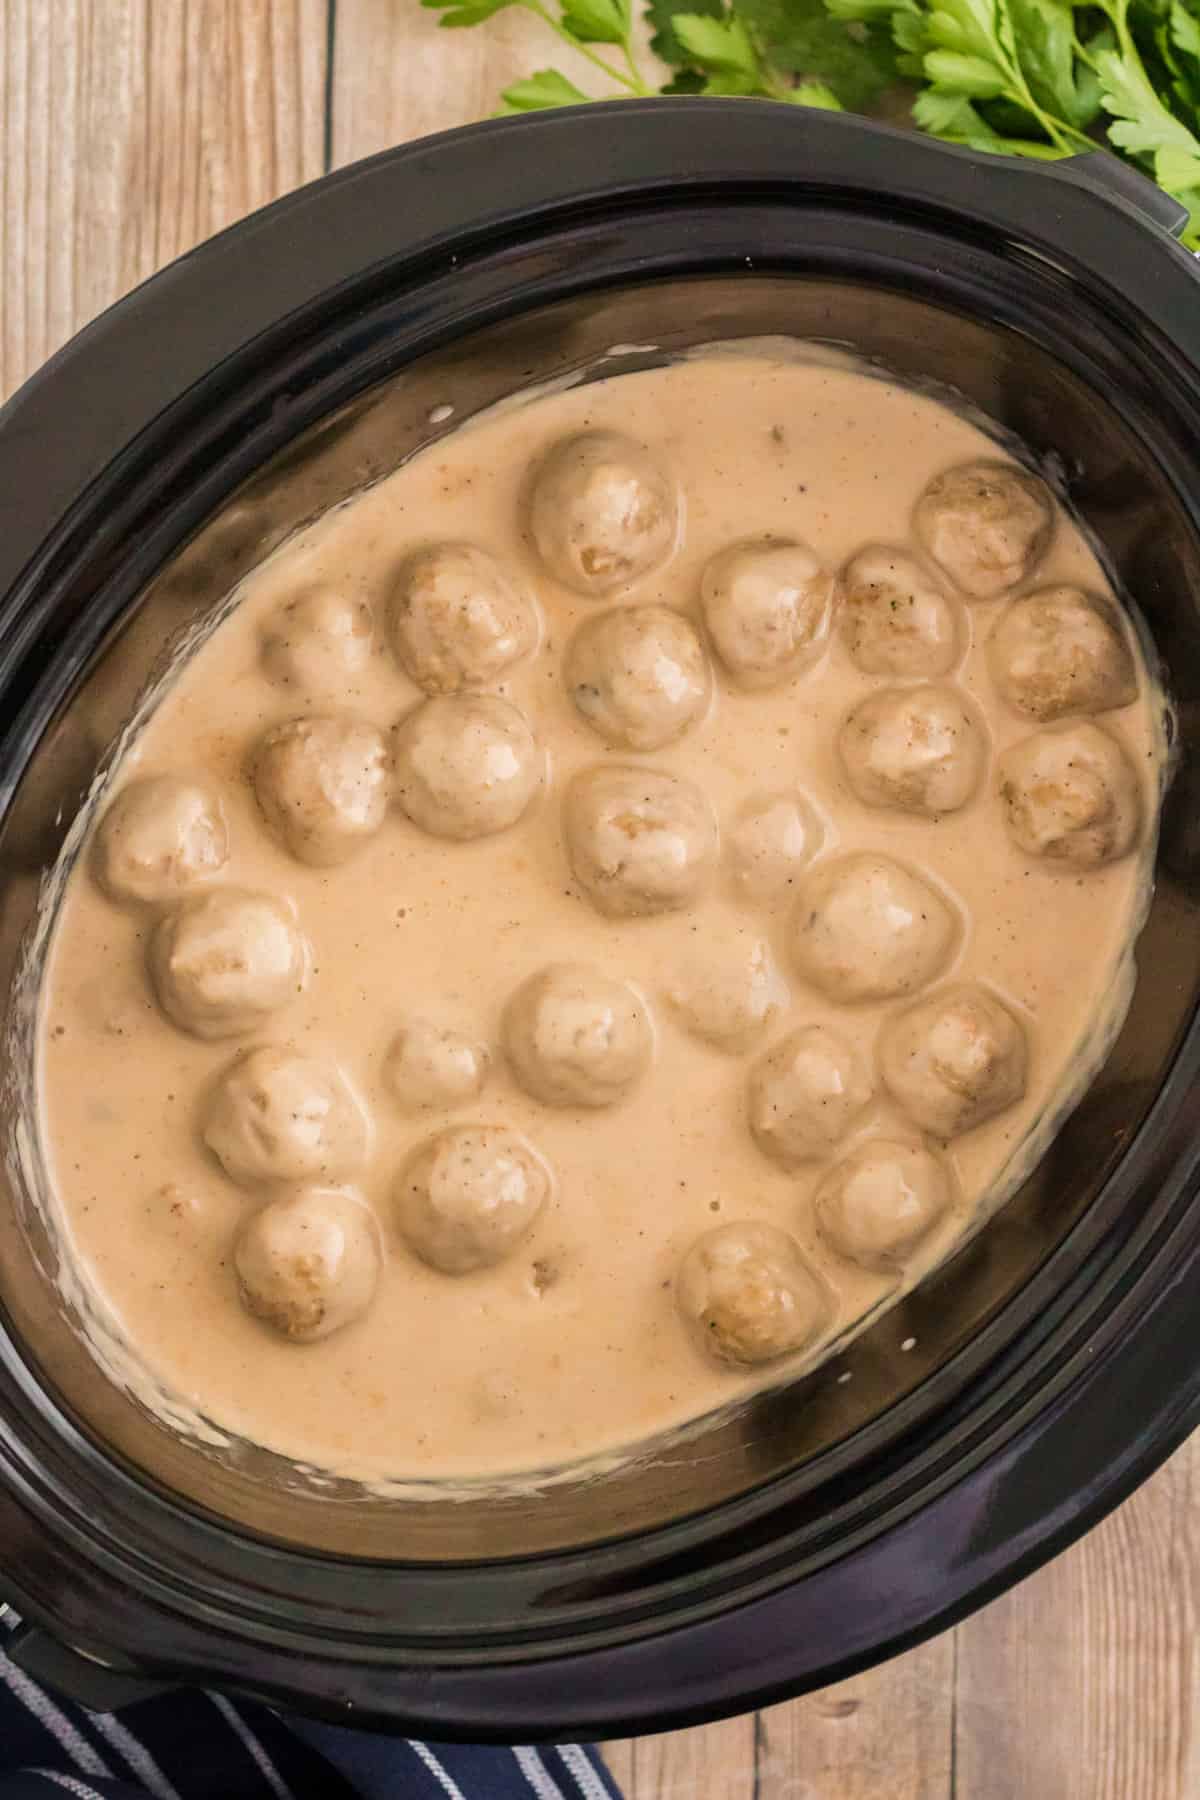 Swedish meatballs in slow cooker after cooking.